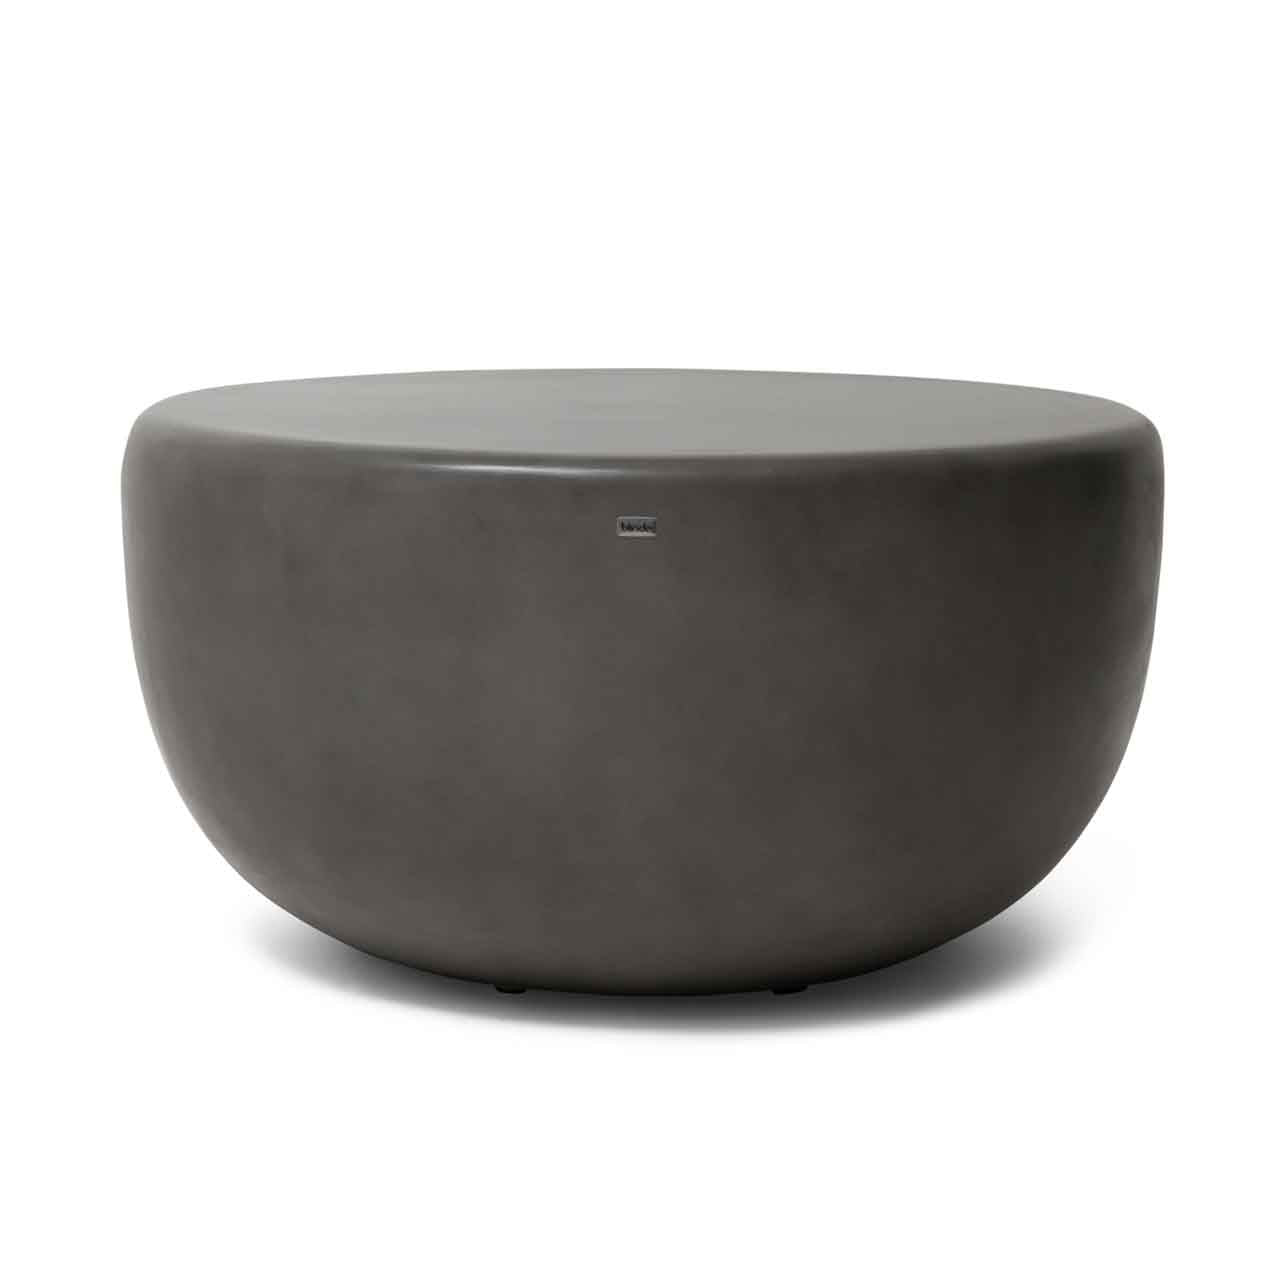 Grey EcoSmart Circ M1 Outdoor Concrete Coffee Table with a smooth, circular top and a stout, curved base, casting a soft shadow at its base, presented against a white background.